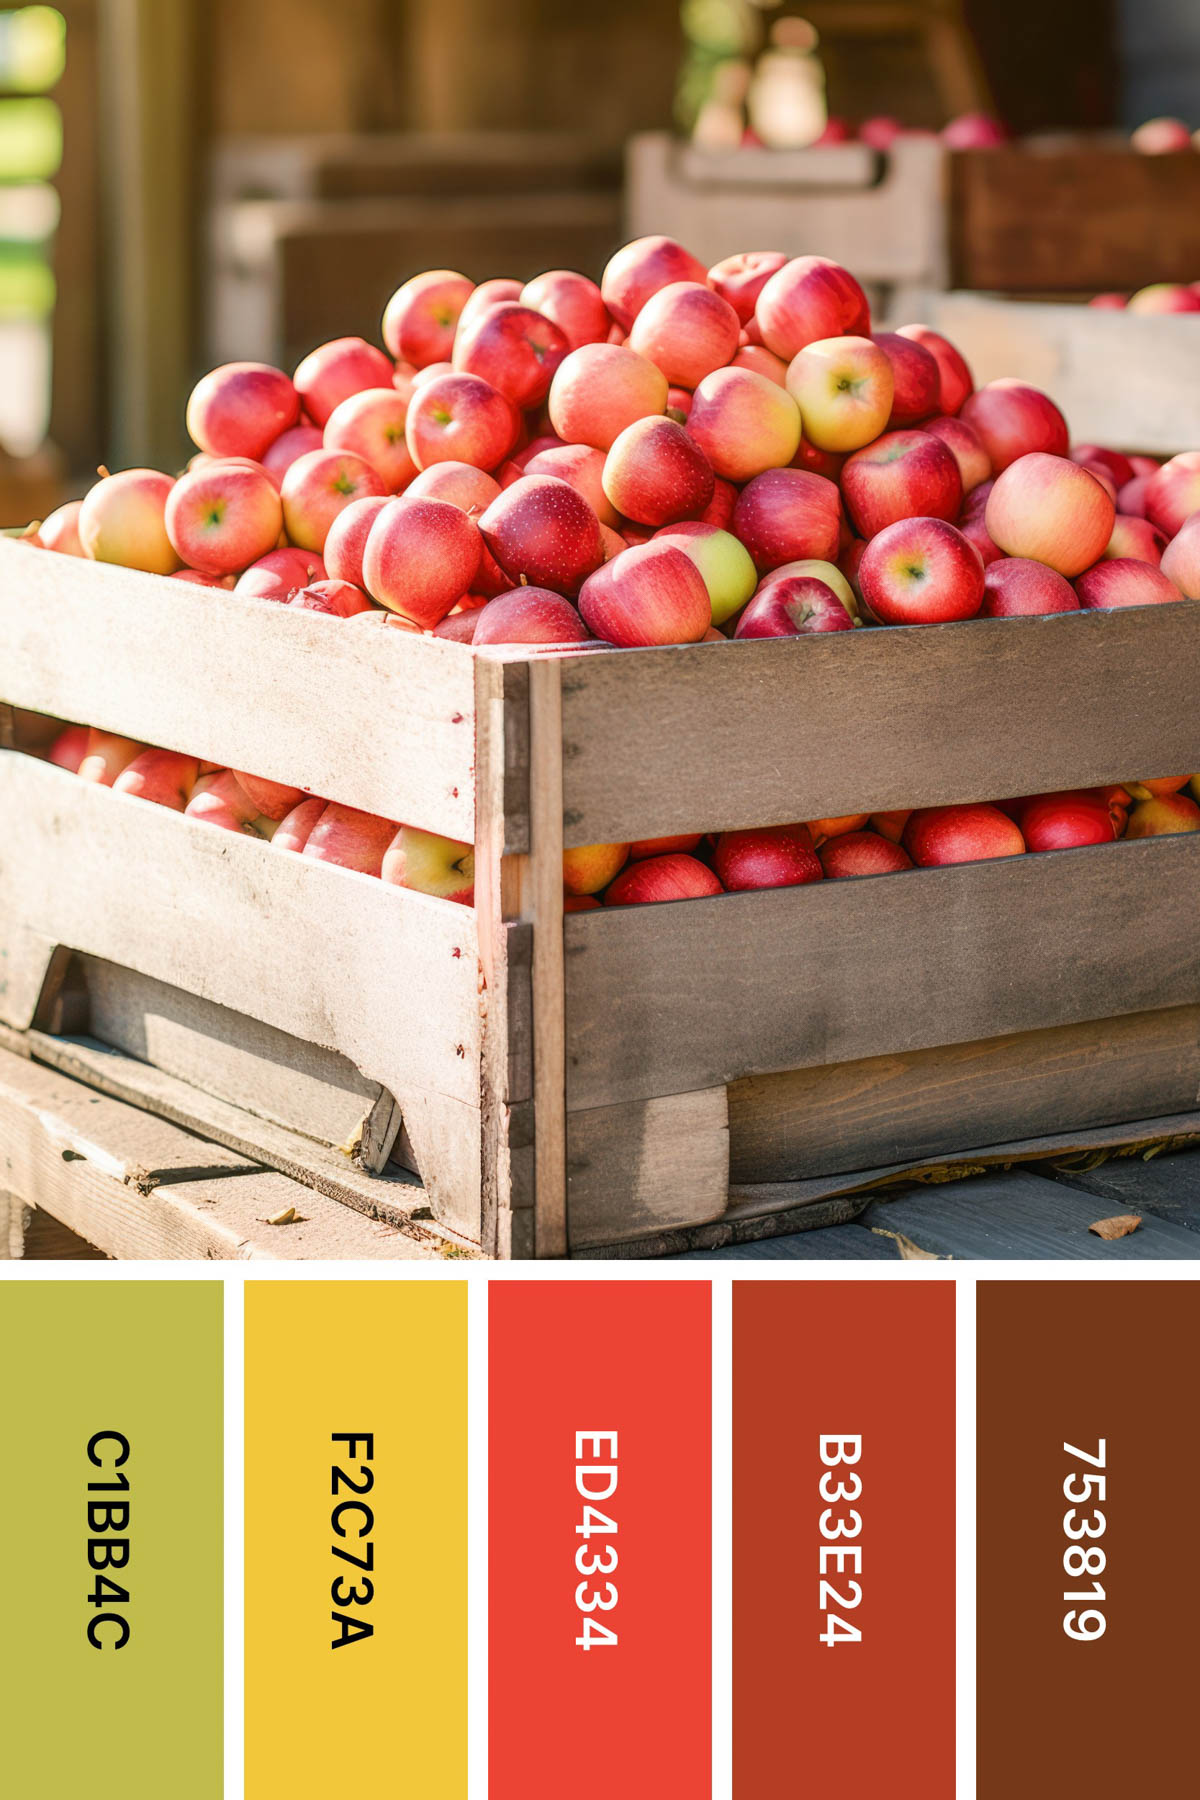 bin of apples with a fall color palette under